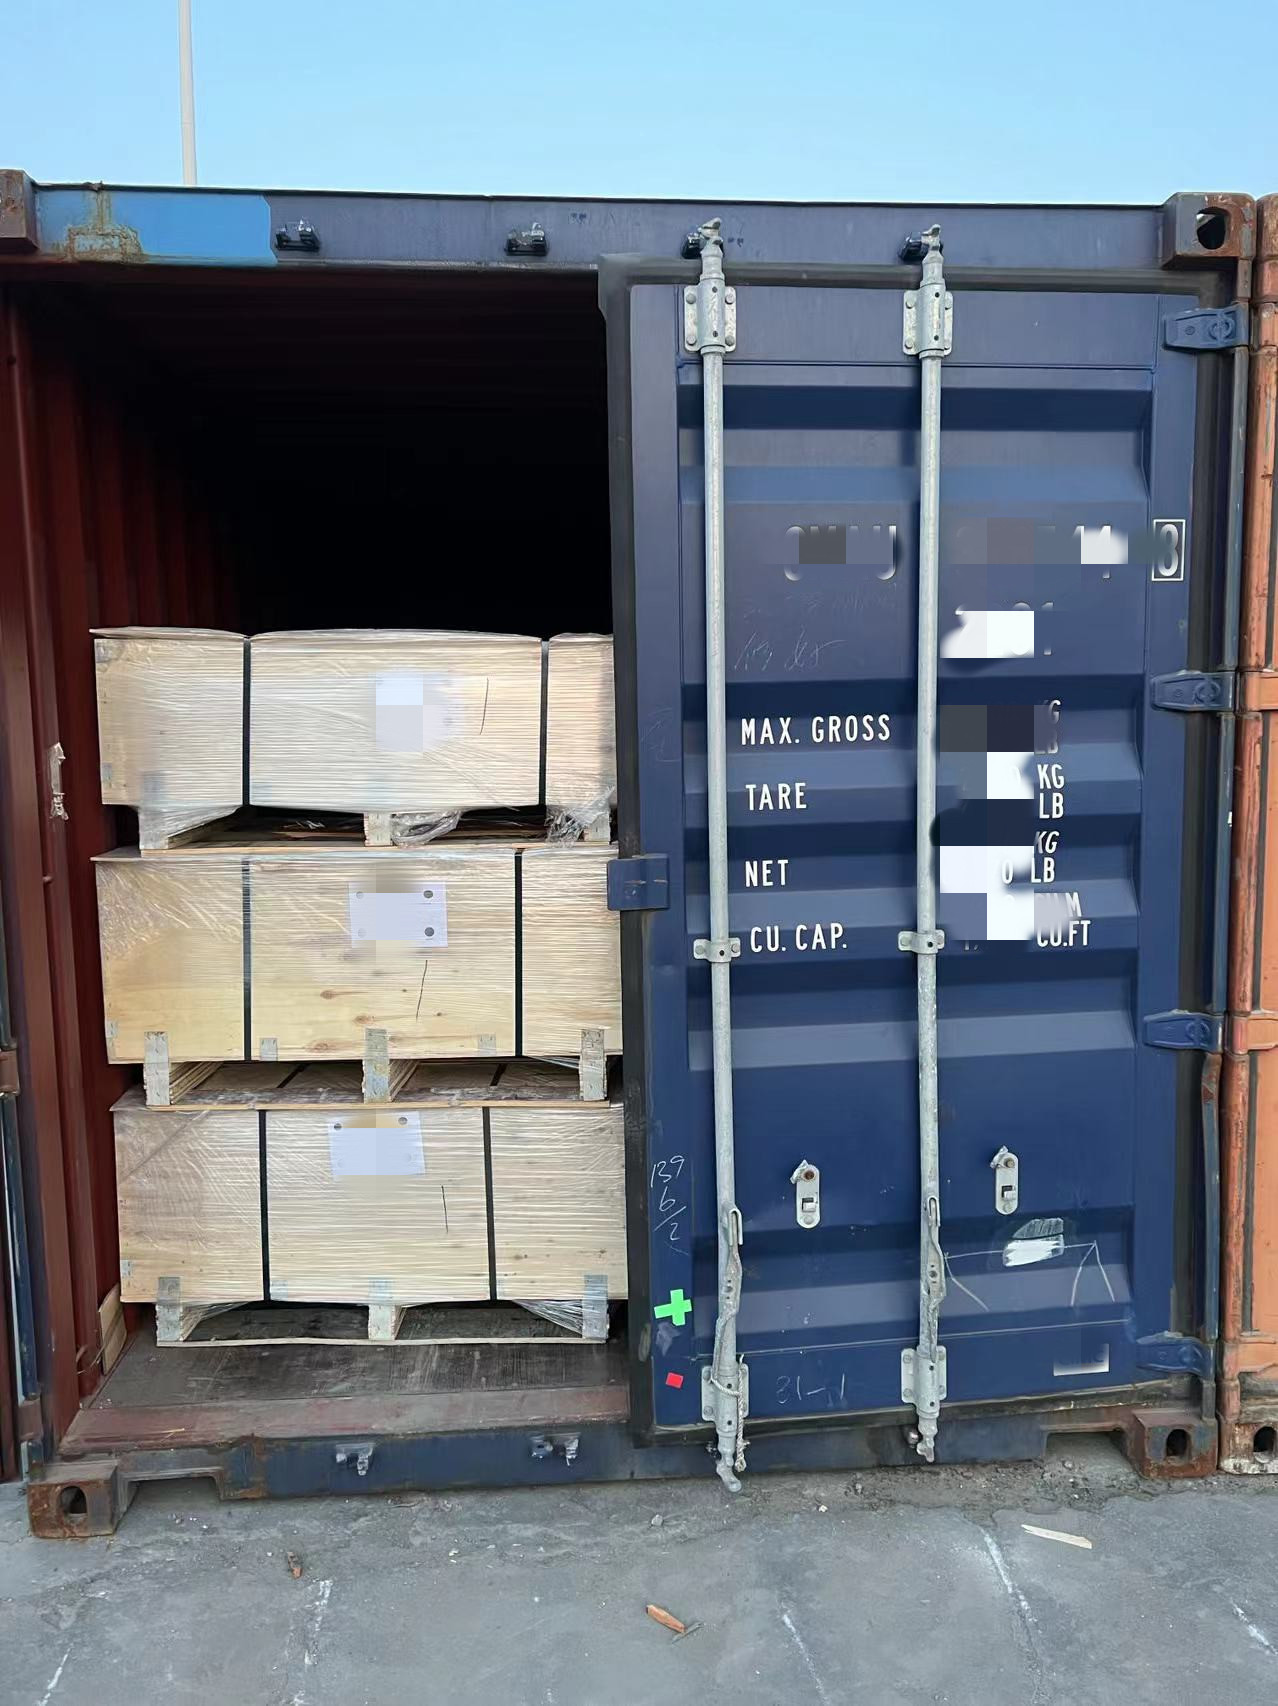 Two containers of JIS 10K Plate Flange are shipped to Malaysia!